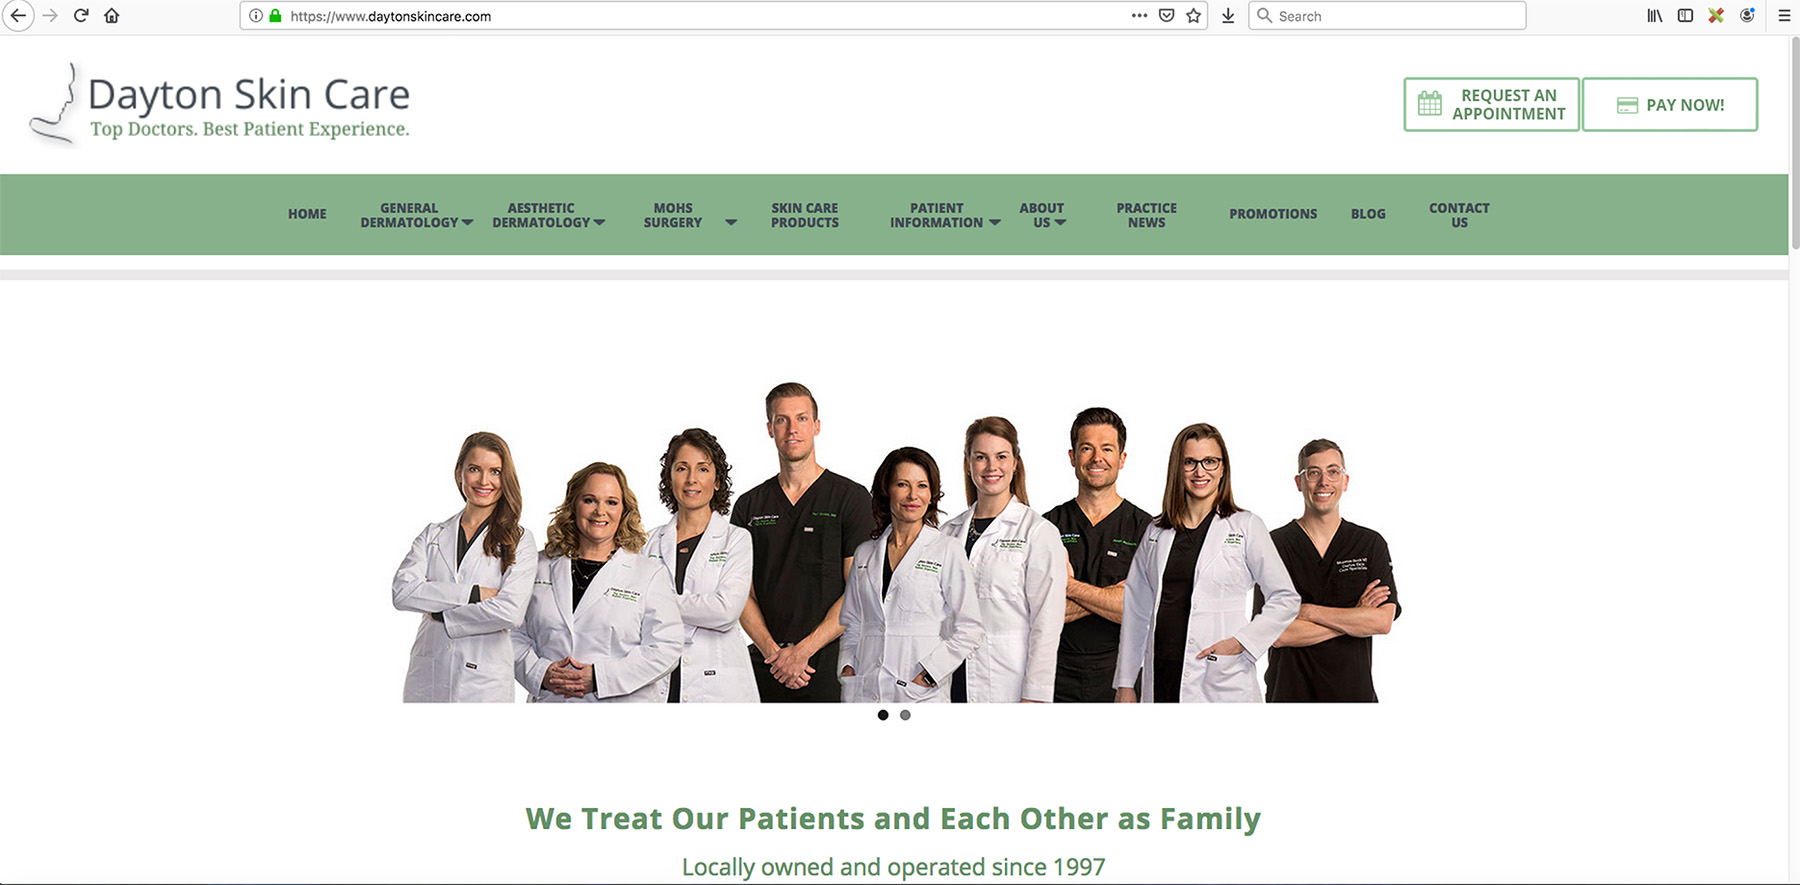 Dayton Skin Care web page by Dan Cleary of Cleary Creative Photography in Dayton Ohio